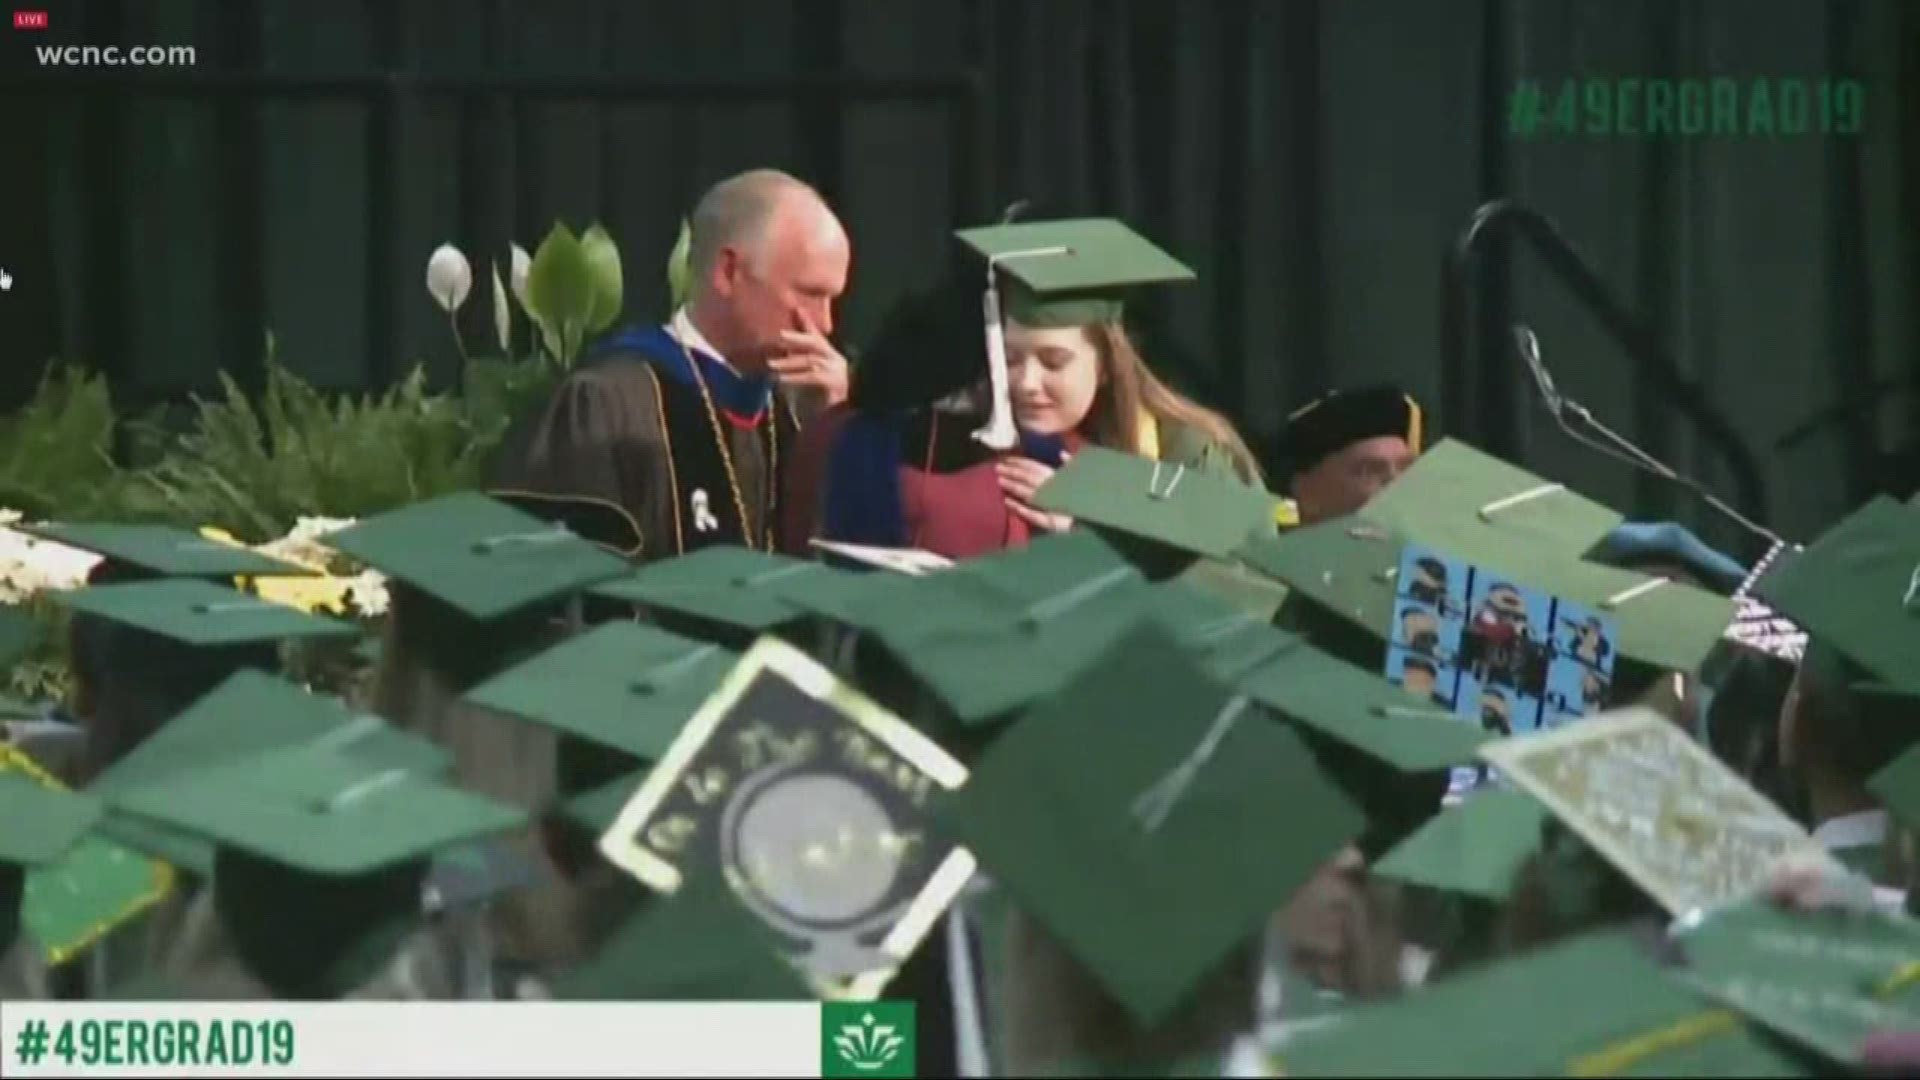 Several students graduating decorated their grad caps with the #CharlotteStrong phrase in memory of the two lives lost and four students injured in the campus shooting.